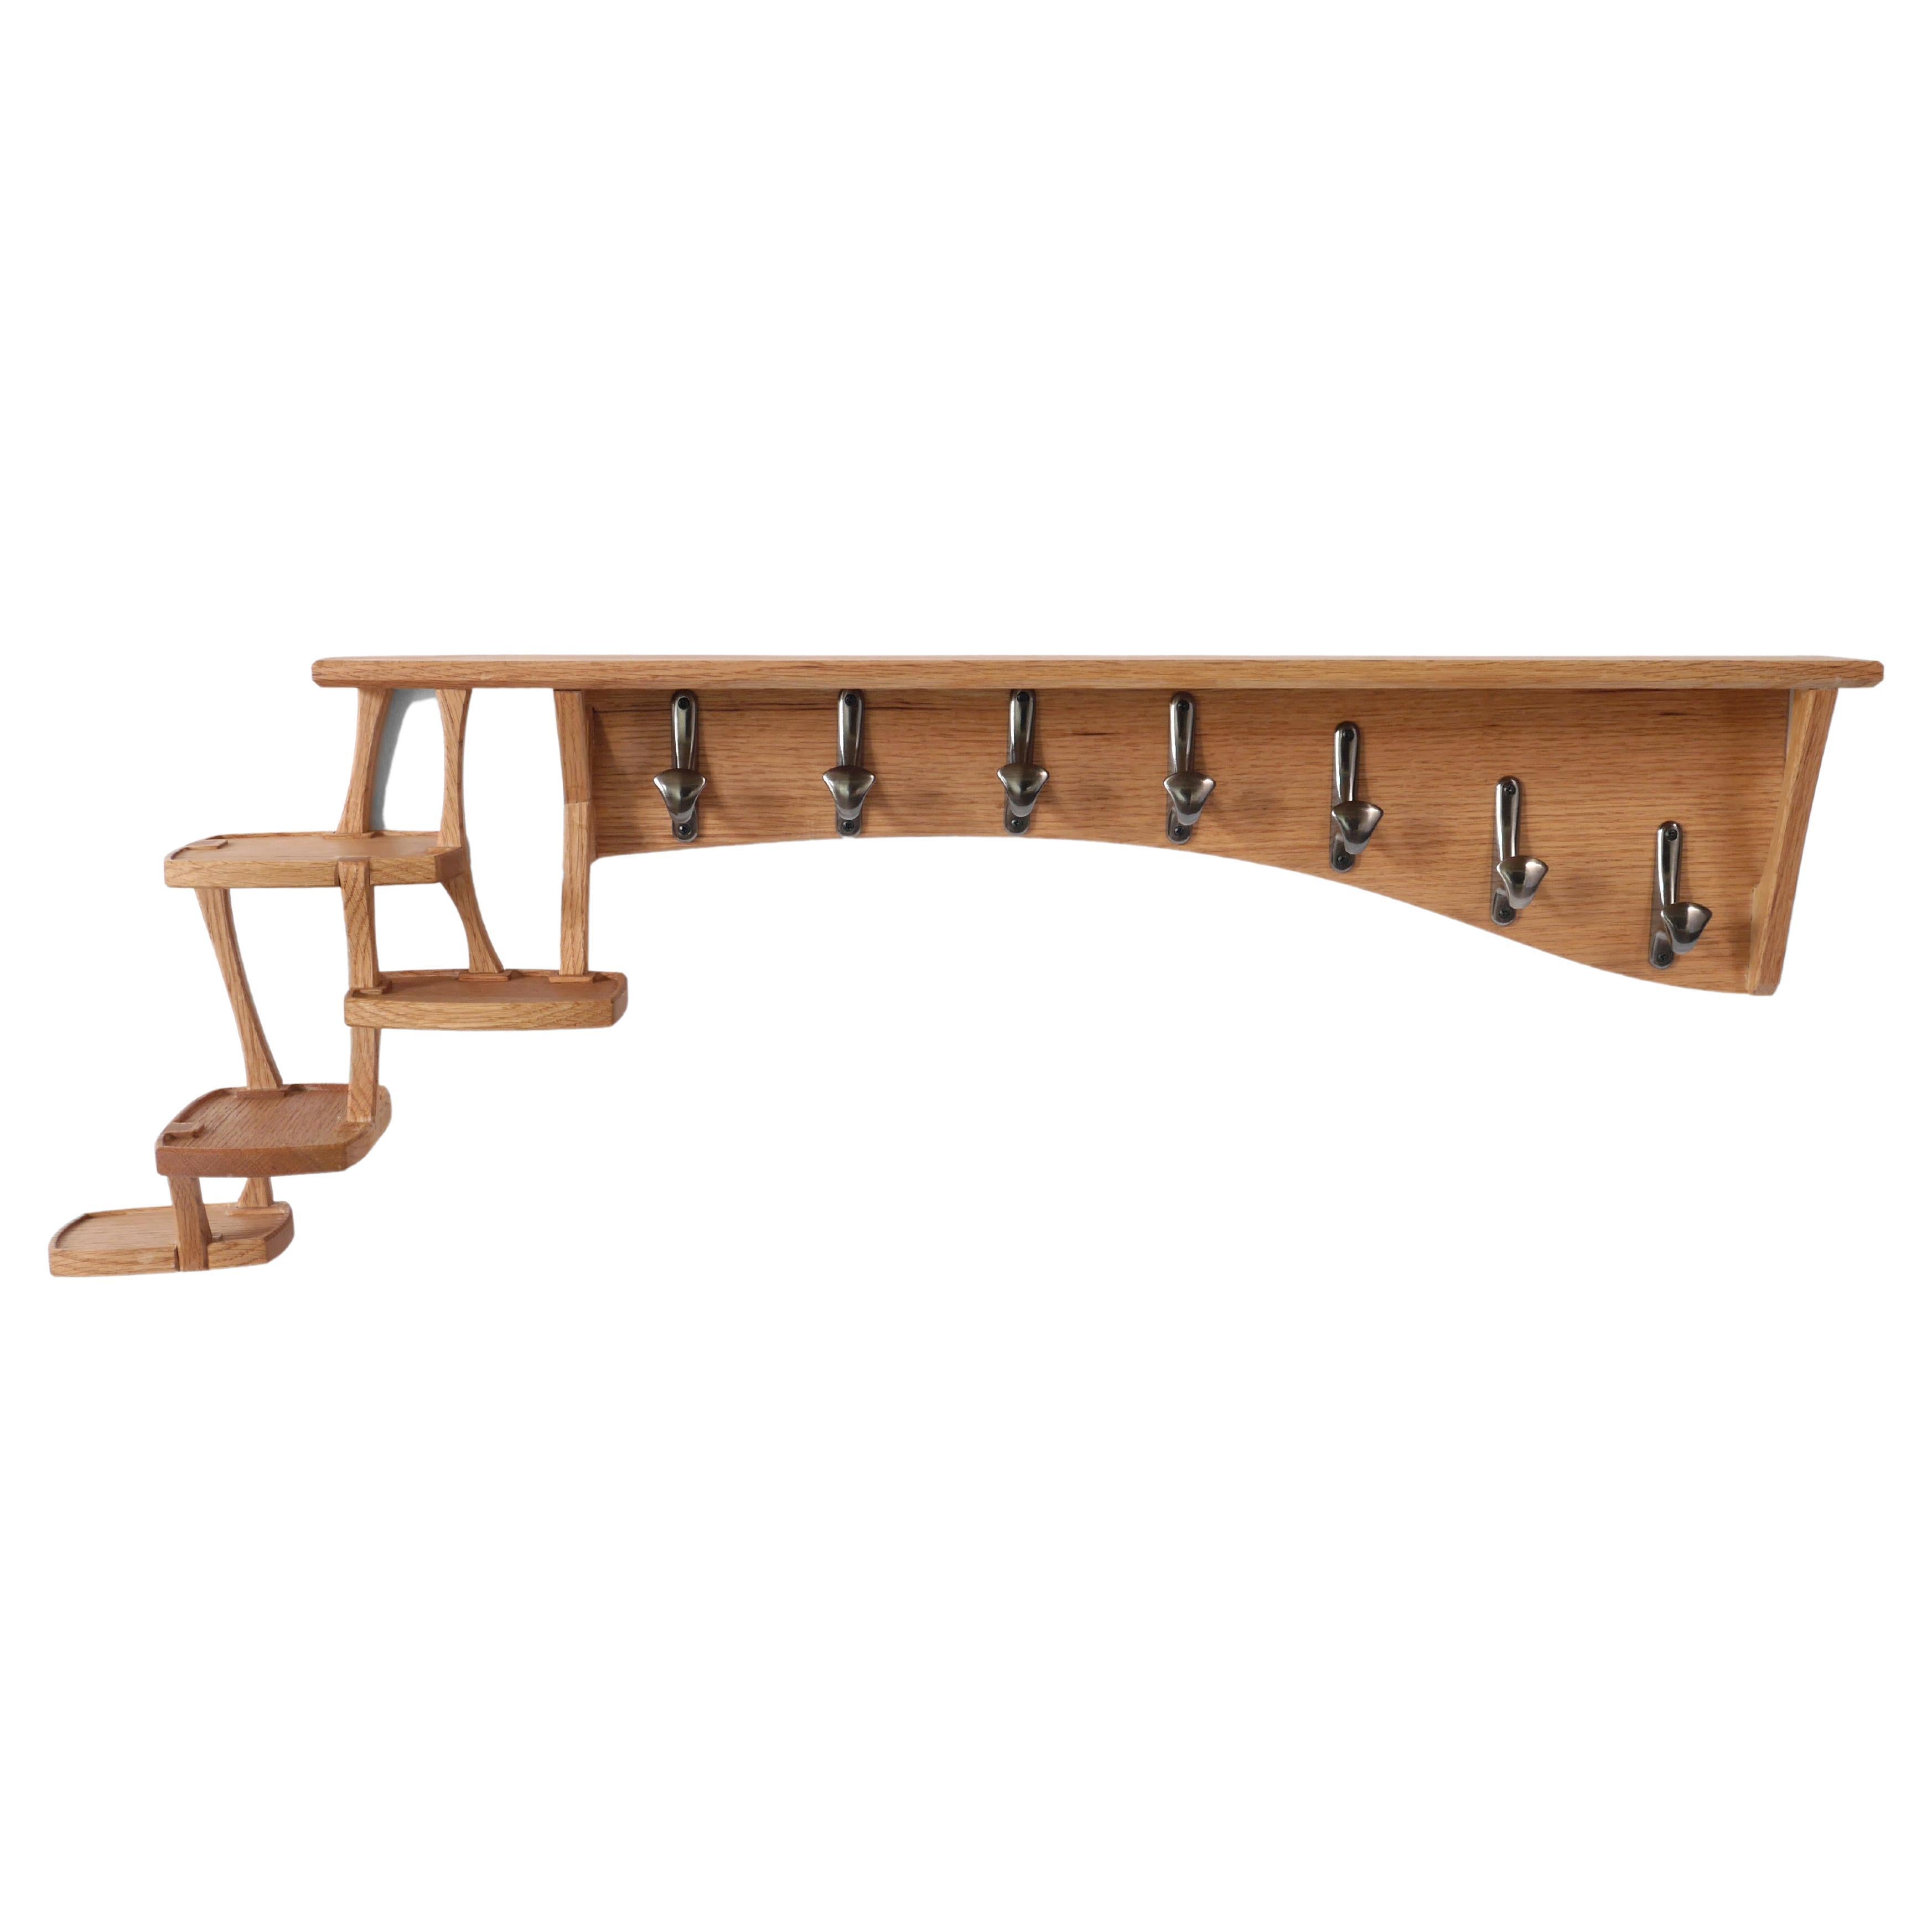 Oak Cirrus Coat Rack, Modern Wall Mounted Hooks and Shelves by Arid For Sale